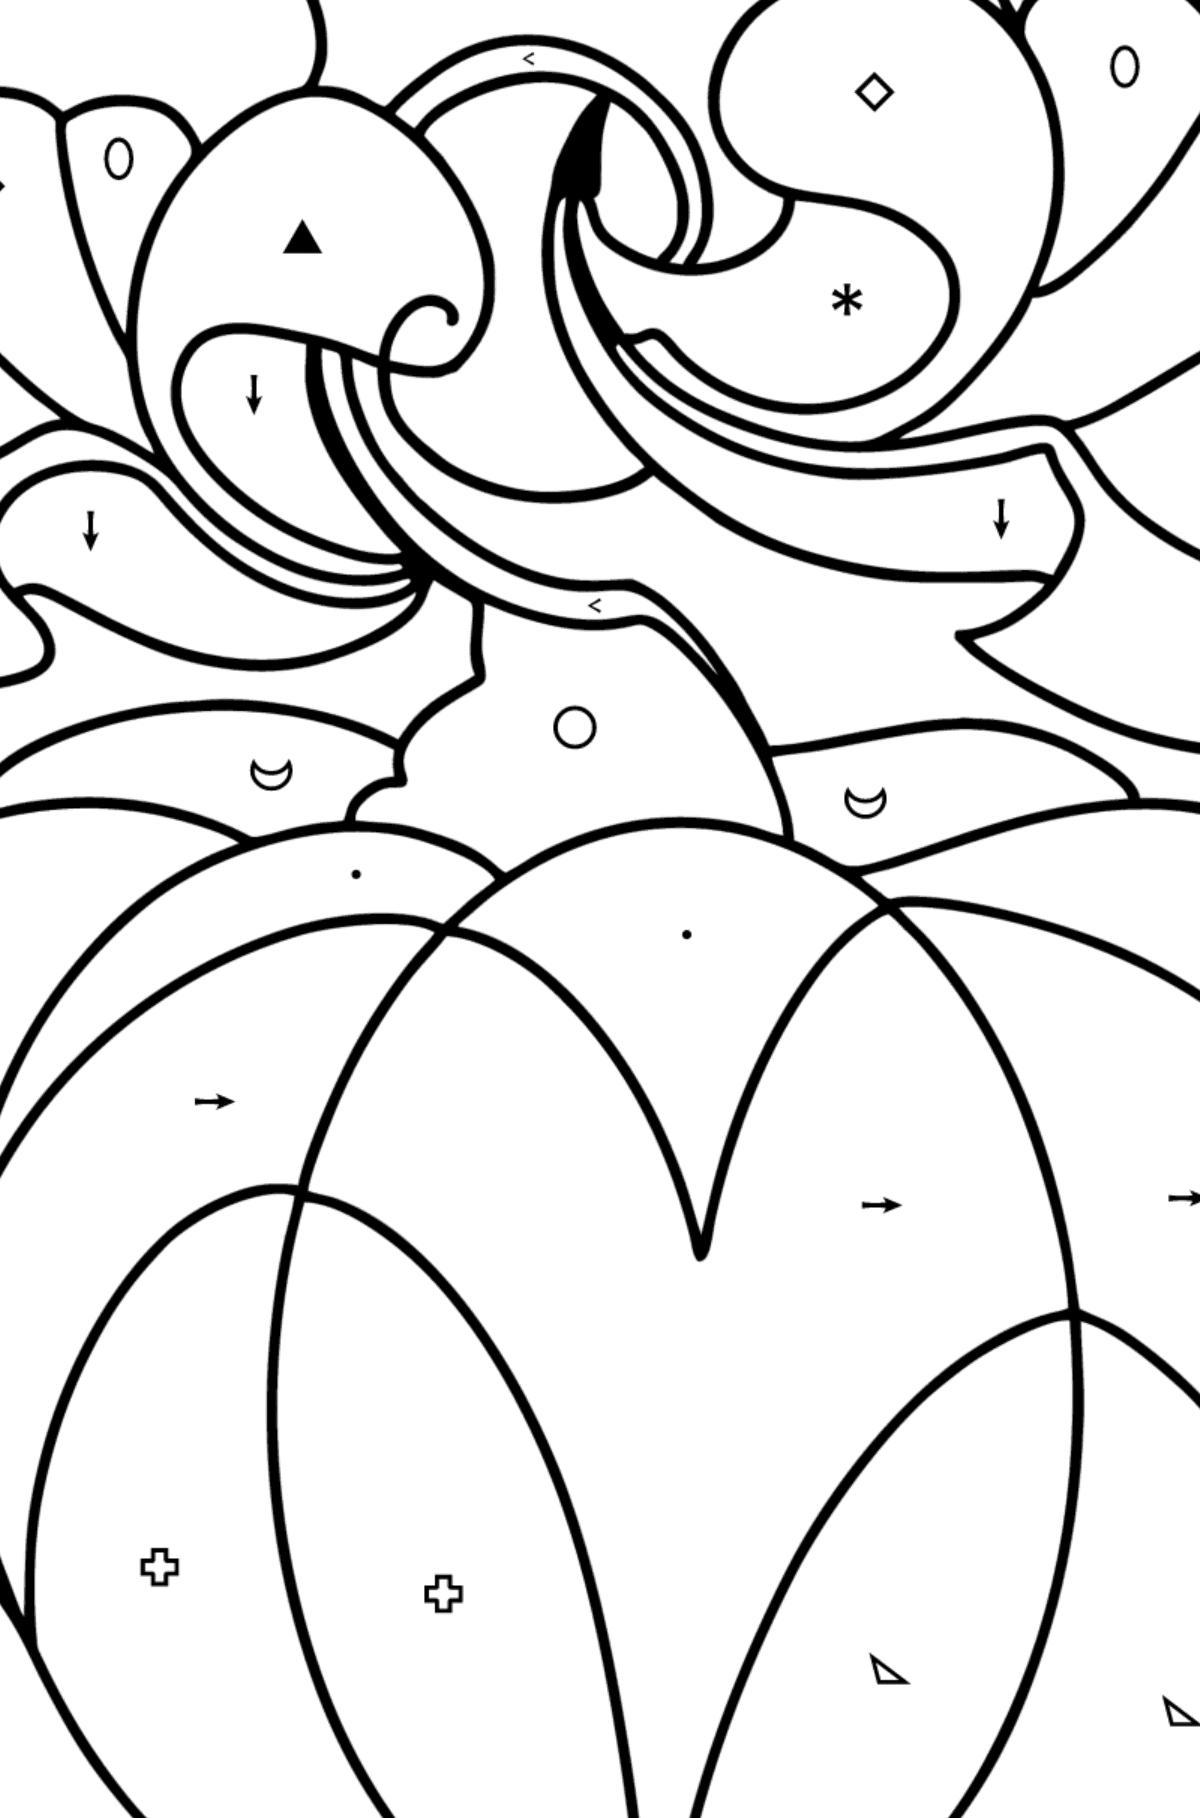 Calming Anti stress Pumpkin coloring page - Coloring by Symbols and Geometric Shapes for Kids